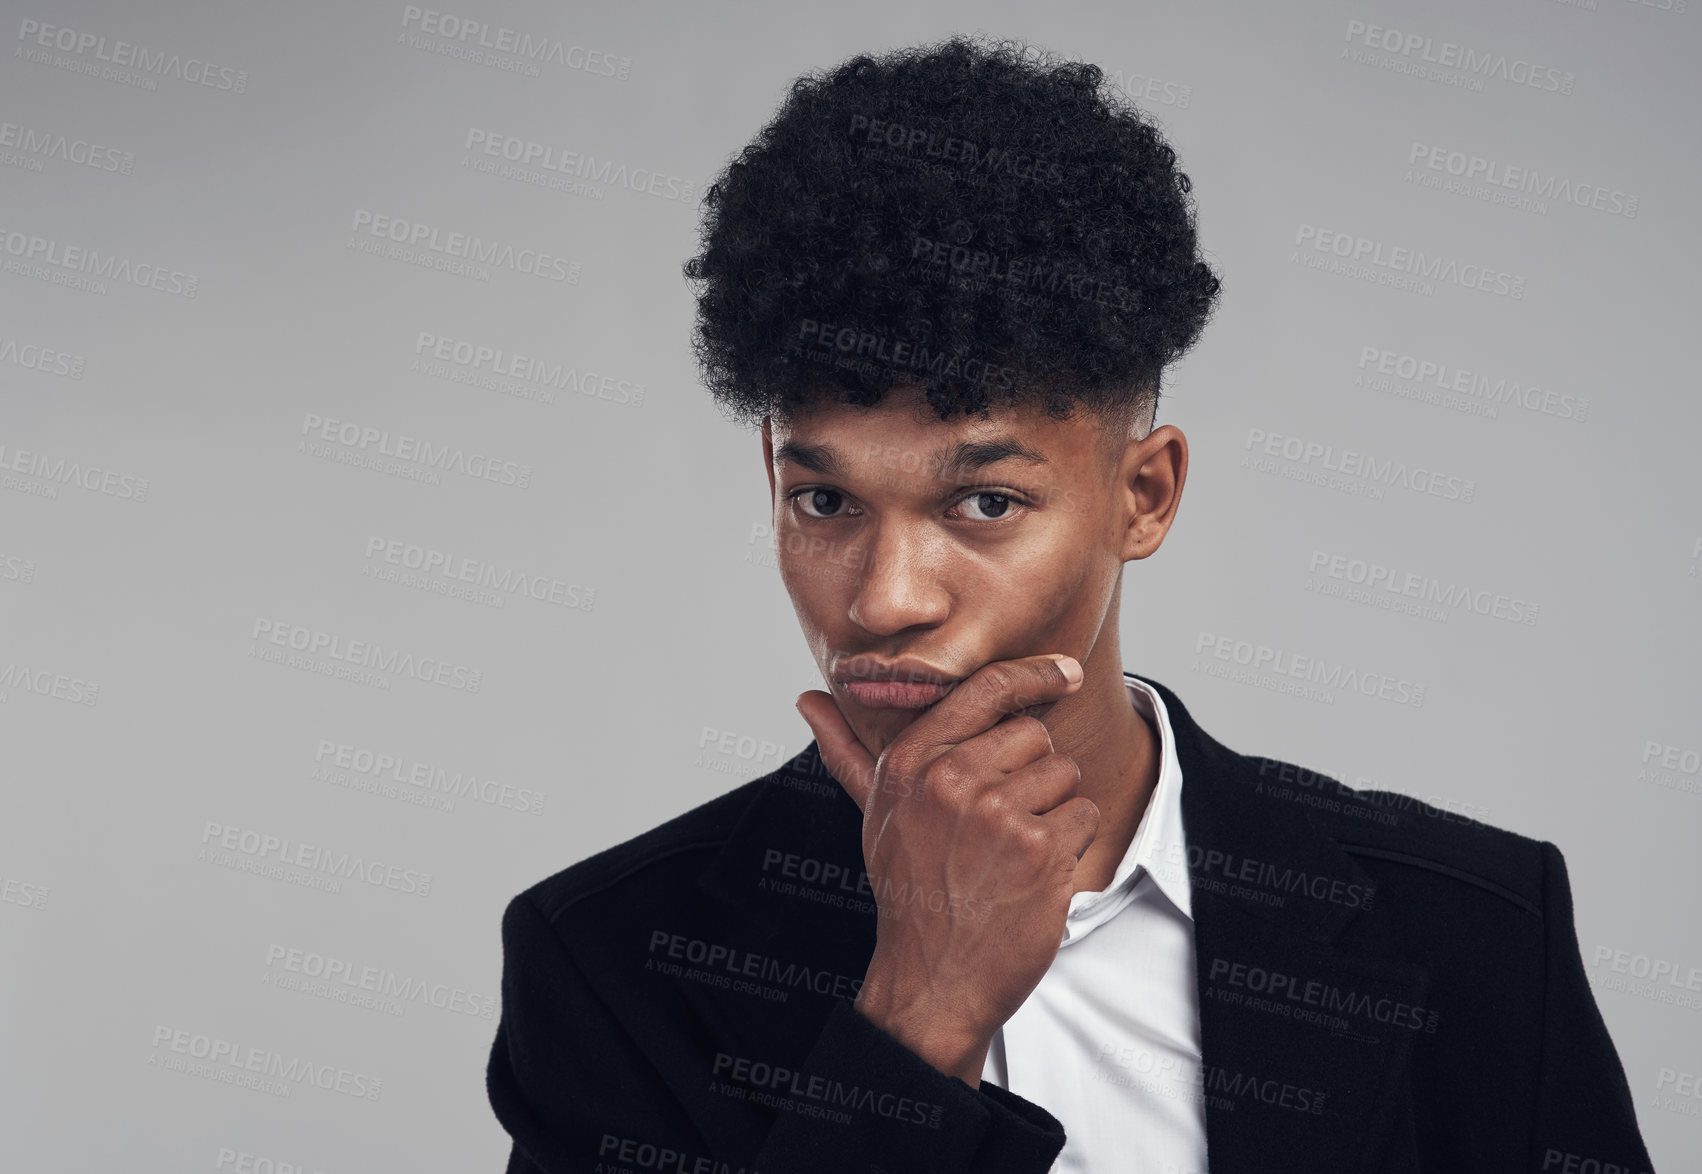 Buy stock photo Studio portrait of a confident young businessman posing against a grey background